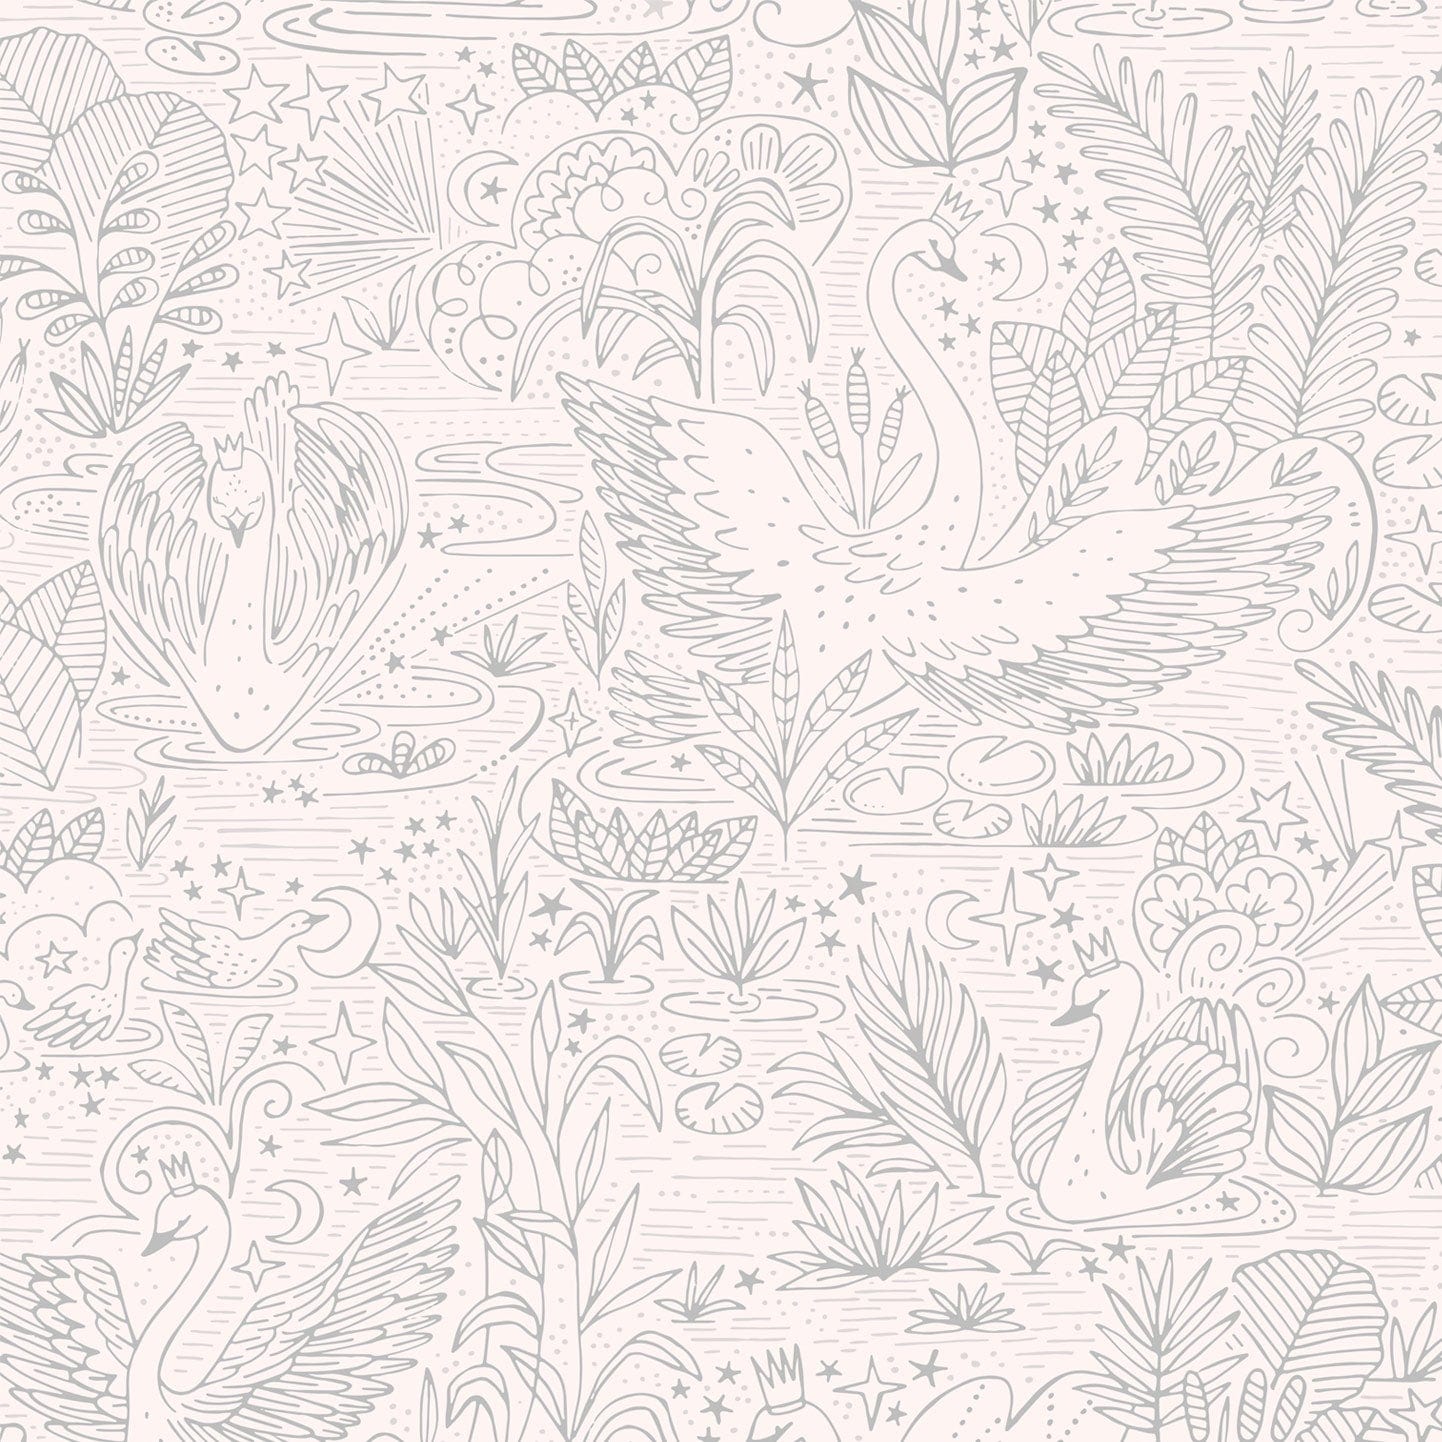 Wallpaper sample of very detailed floral print with swans gliding across a lake, flowers and leaves surround them. The print is line work and is all in grey